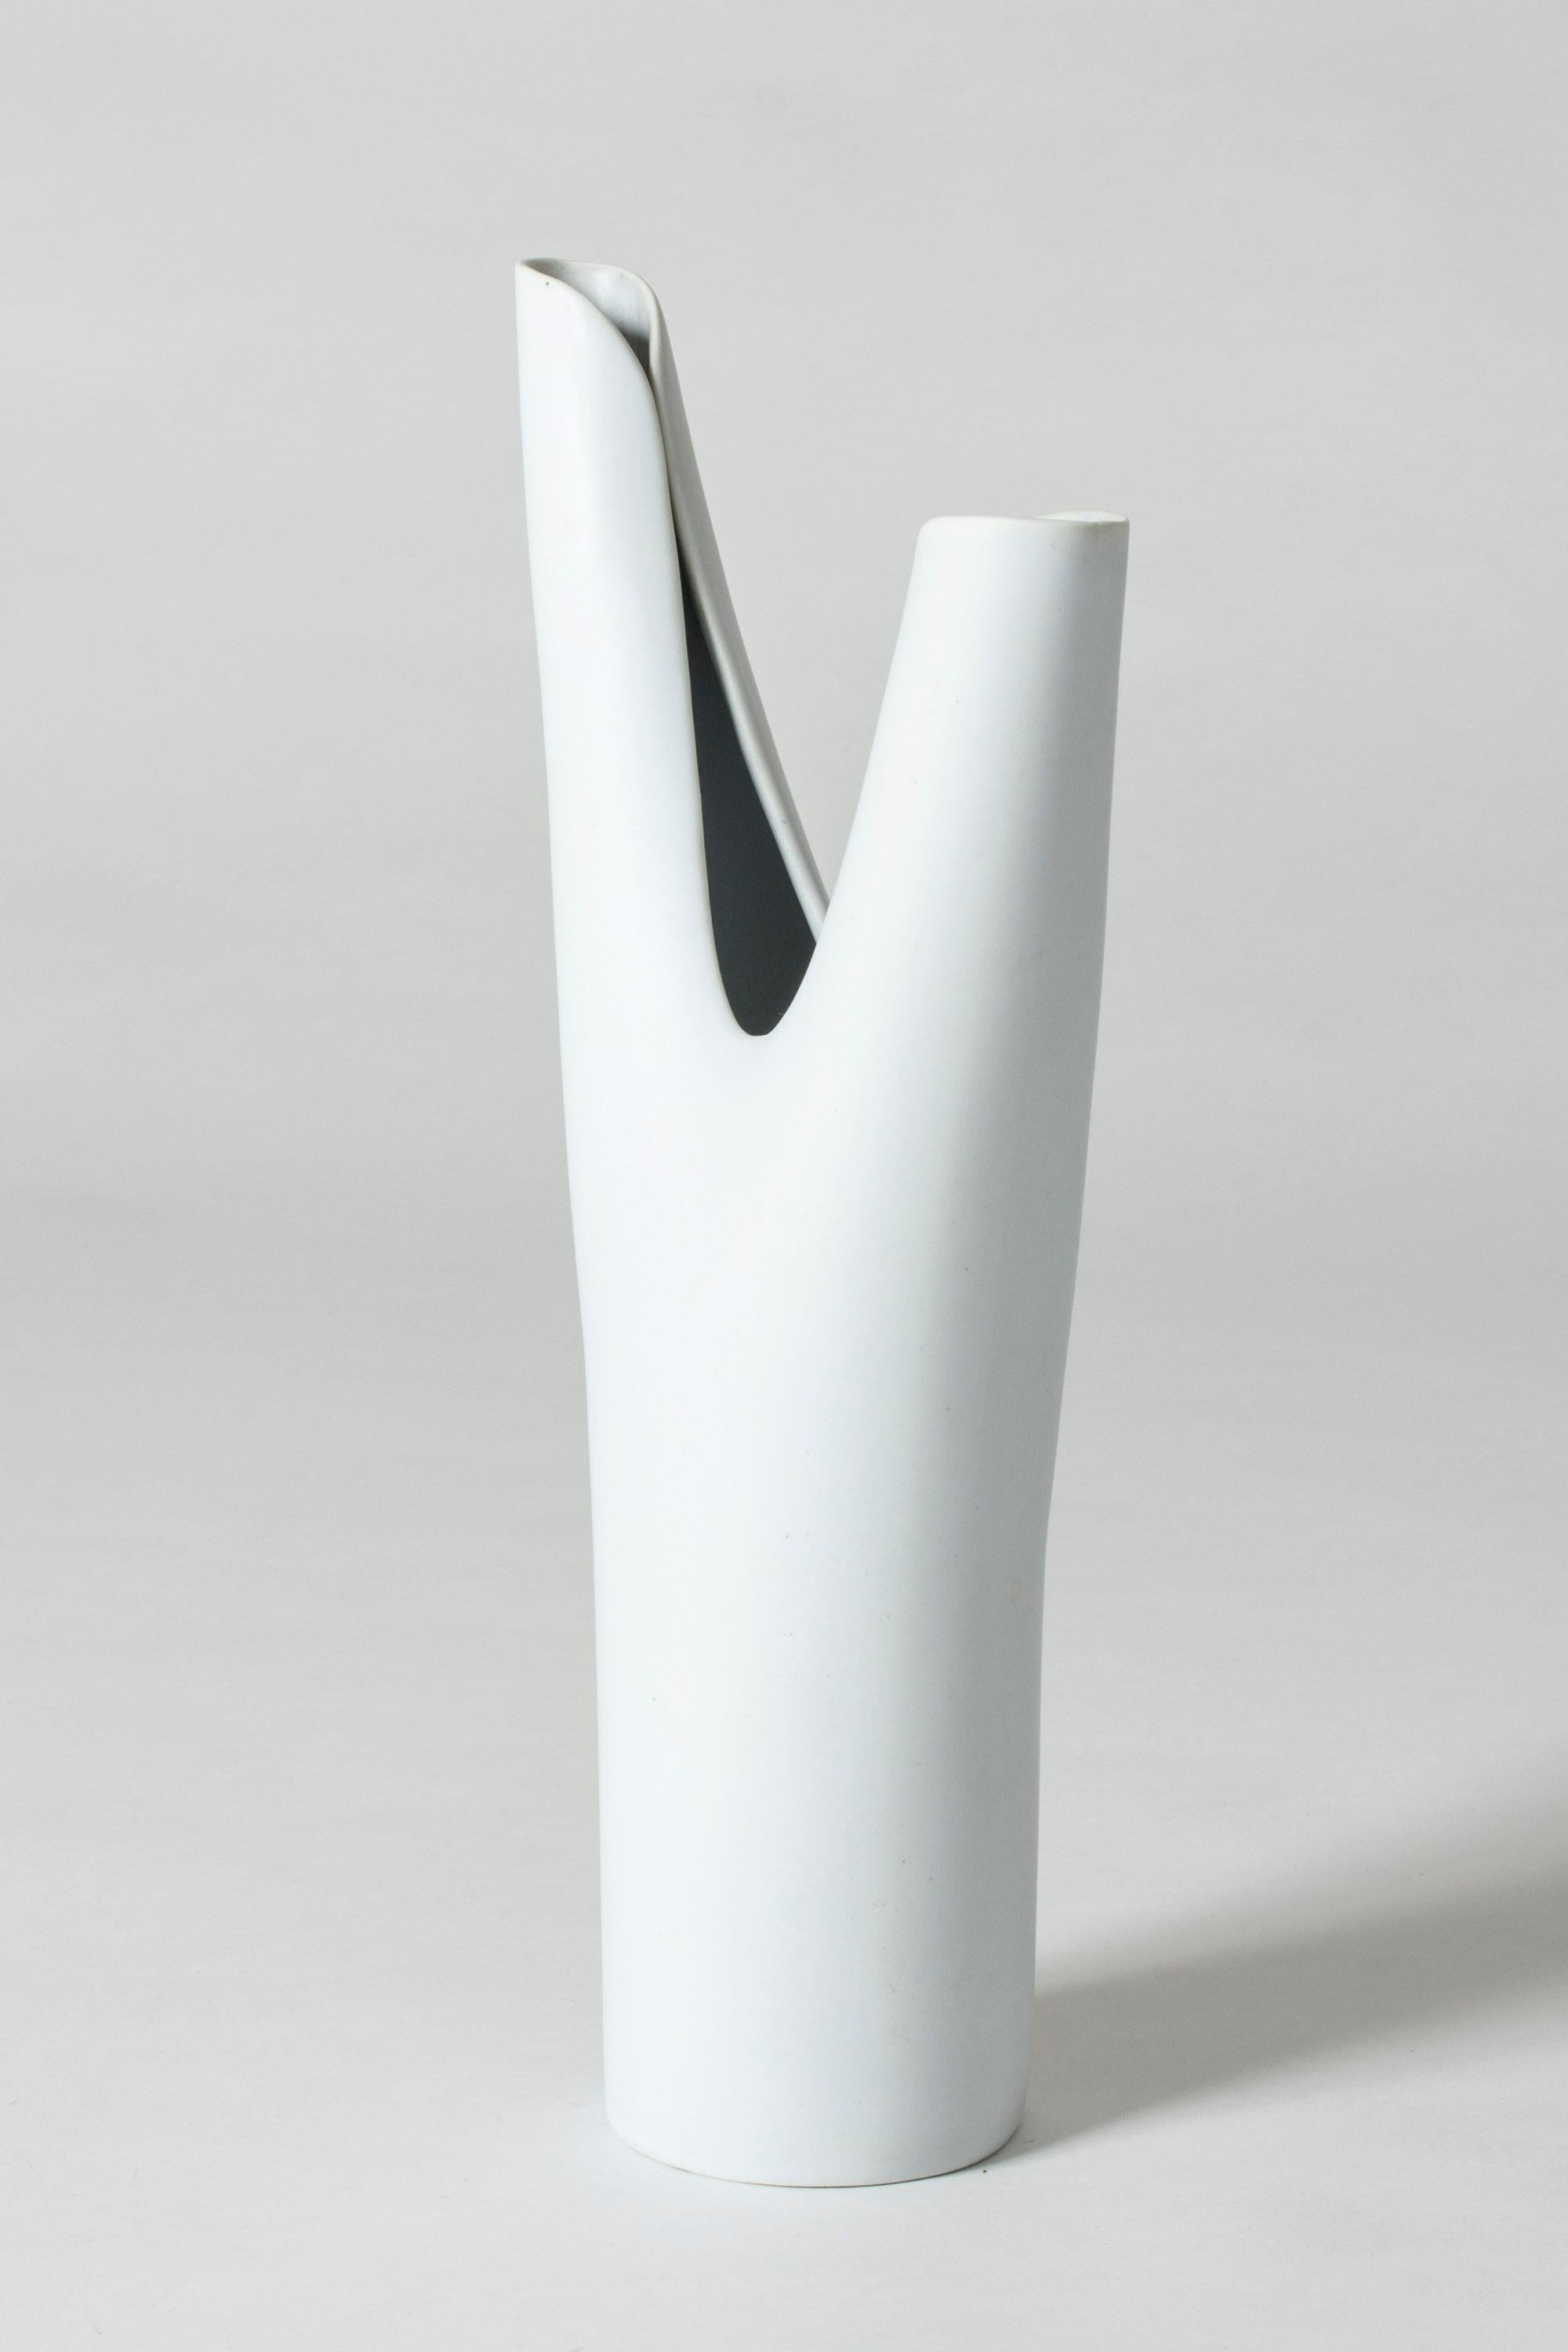 “Veckla” vase by Stig Lindberg, made in white Carrara stoneware. Unique, innovative design where the clay is folded inwards in a very sensual way. The “Veckla” series consisted of vases, bowls and trays and was produced between 1952 and 1960.